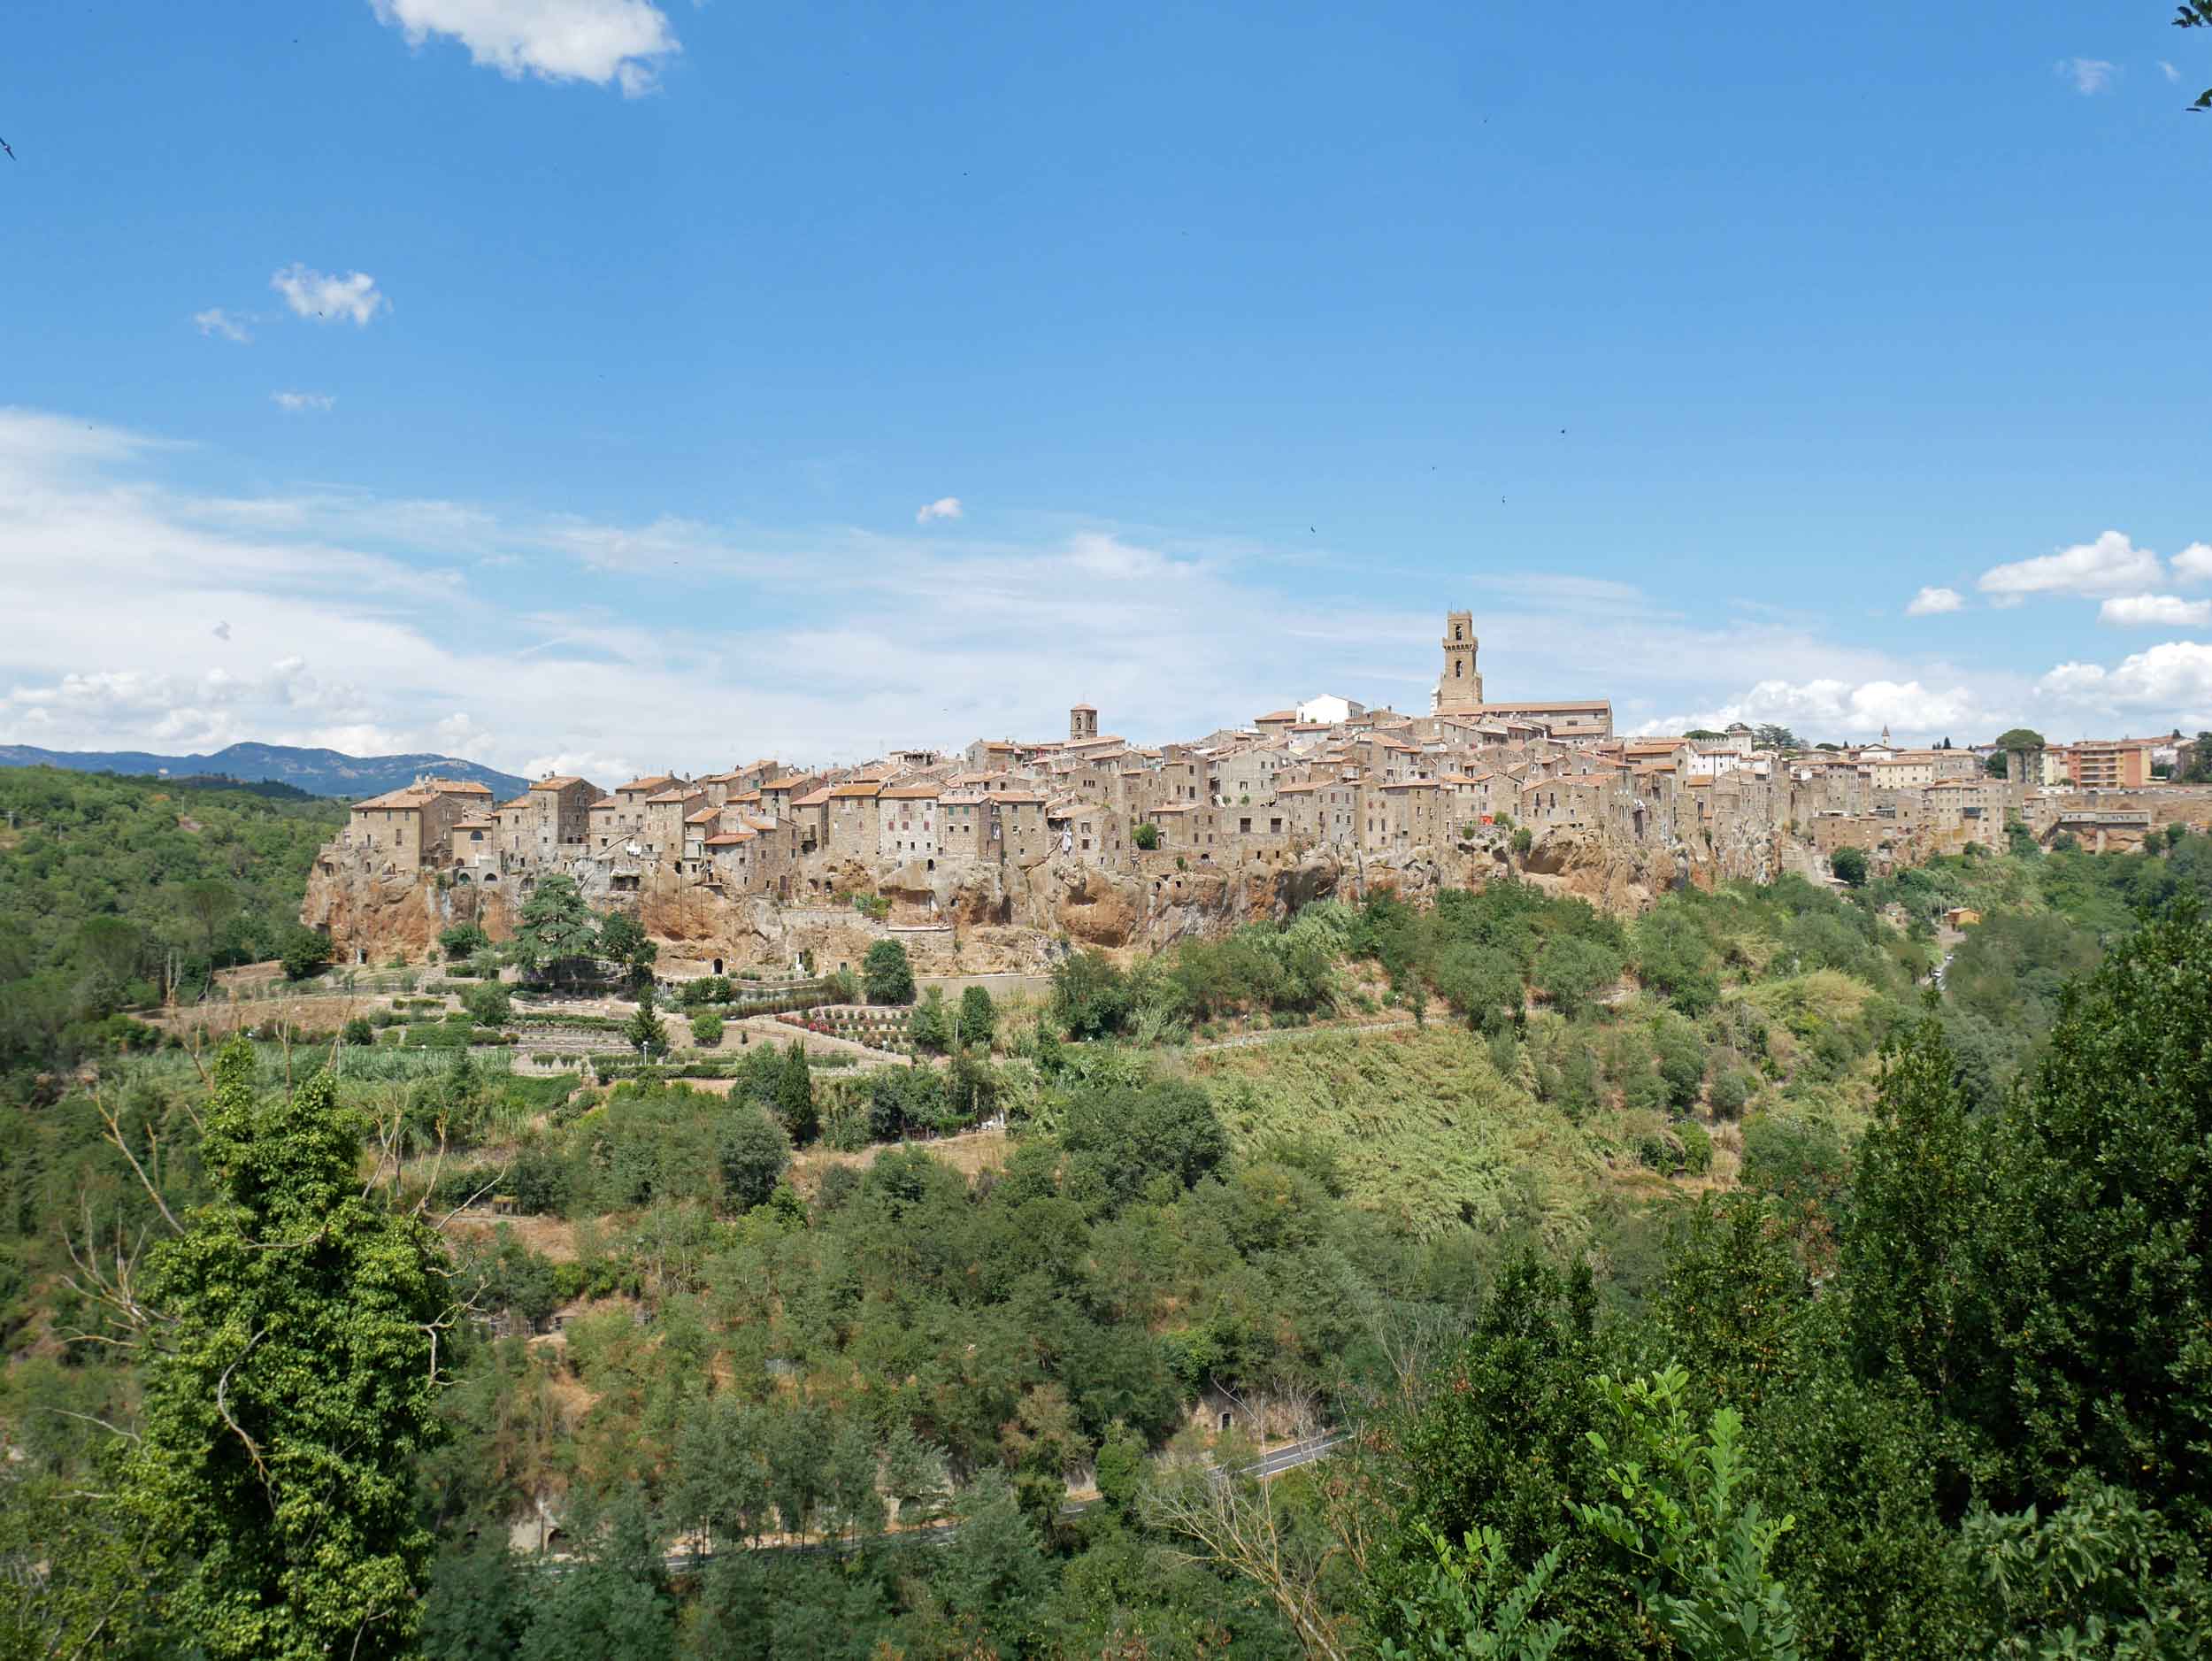  The village of Pitigliano appears to be carved straight from the rock upon which it sits.&nbsp; 